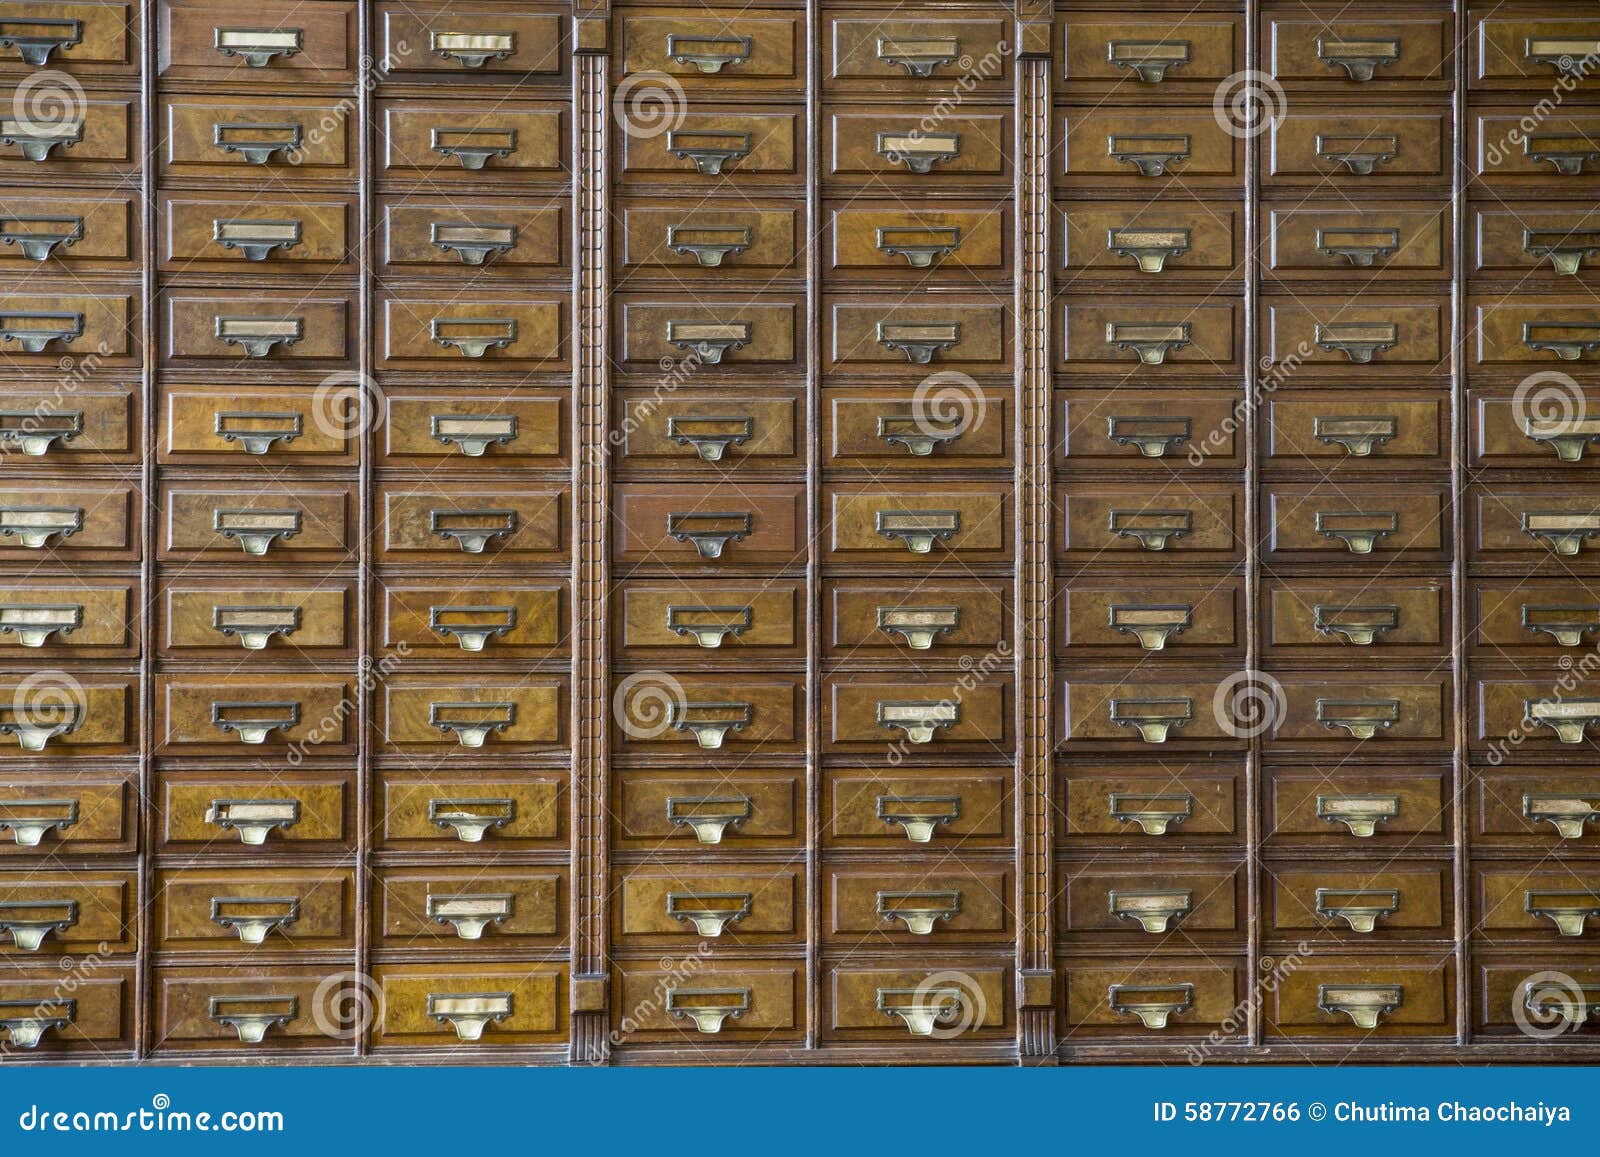 Close Up Of A Very Old Apothecary Cabinet Stock Photo Image Of